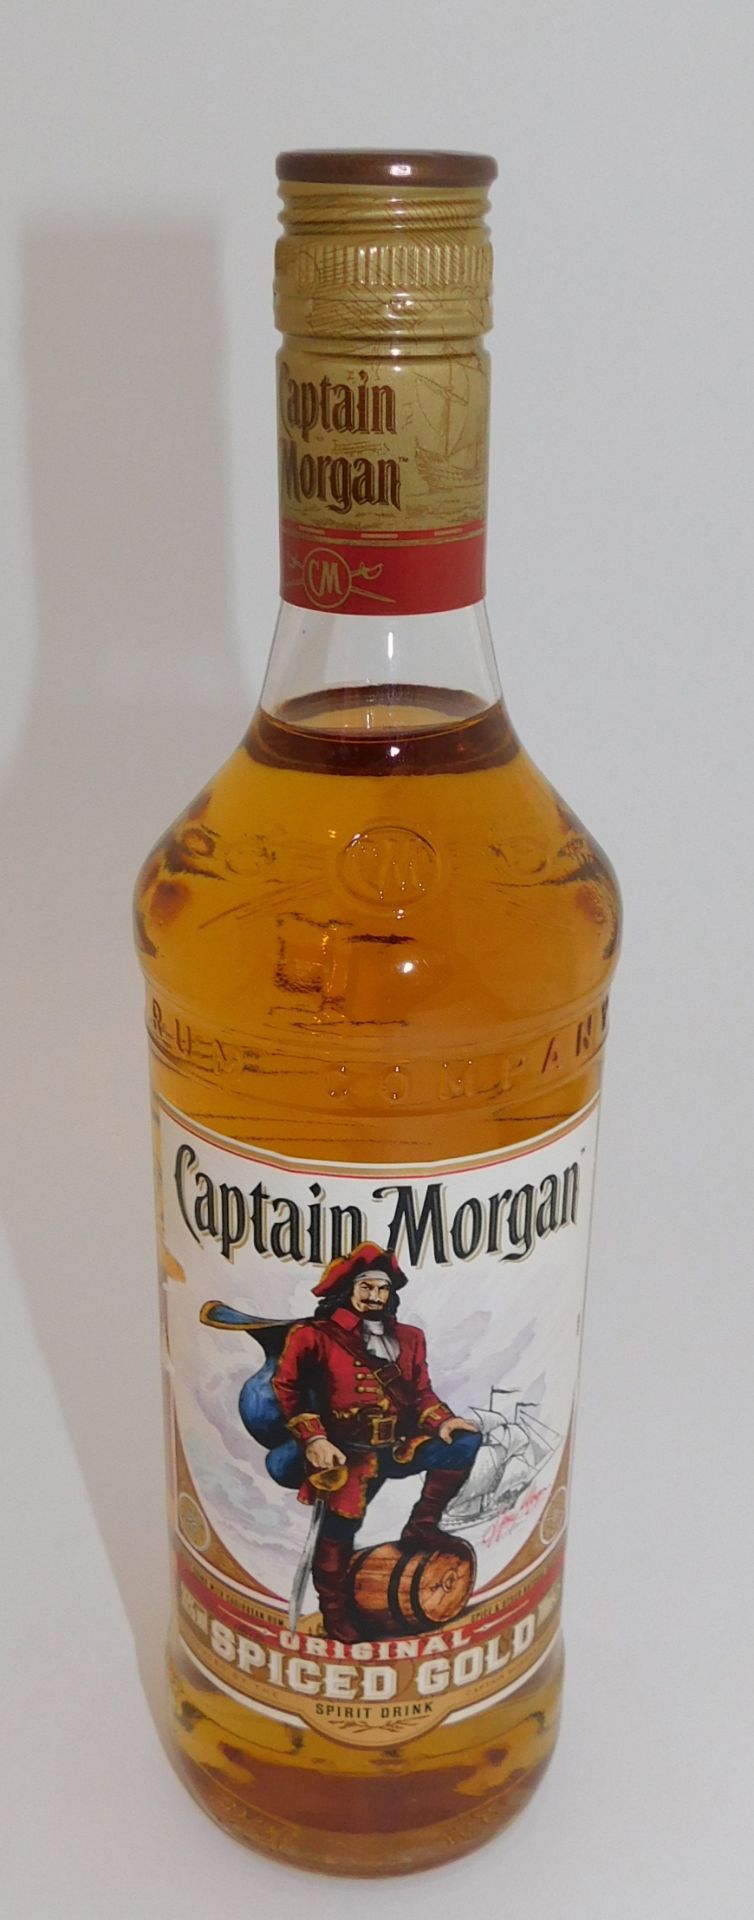 9 Bottles of Captain Morgan Original Spiced Gold Spirit Drink, 700ml (Located Stockport – See